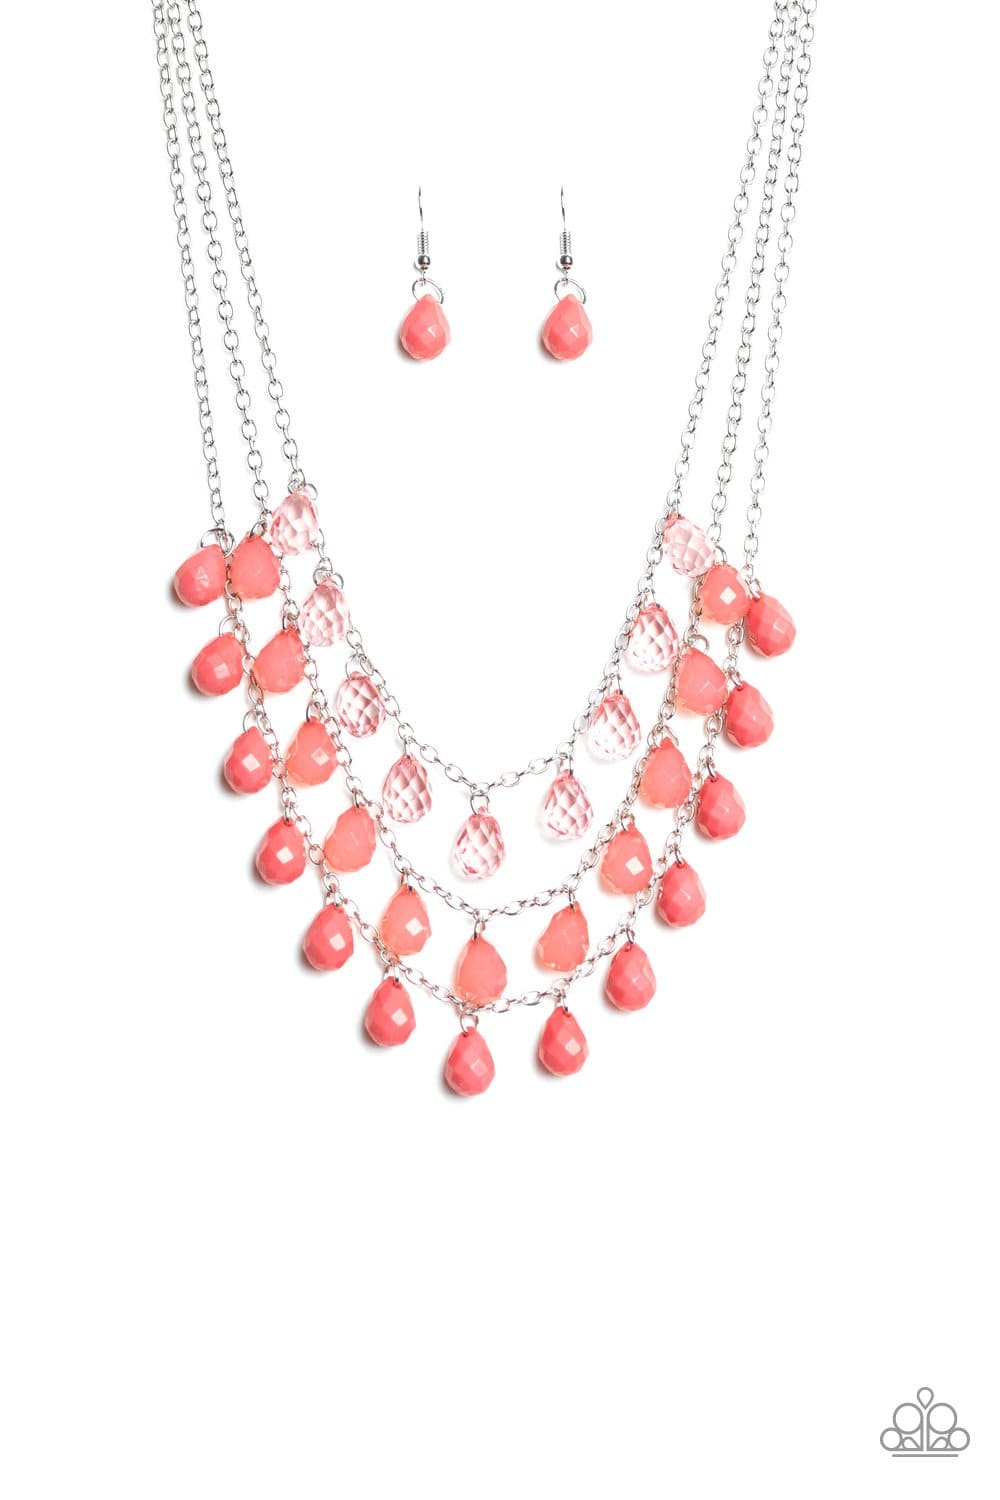 Melting Ice Caps - Coral Pink Necklace - Paparazzi Accessories - GlaMarous Titi Jewels